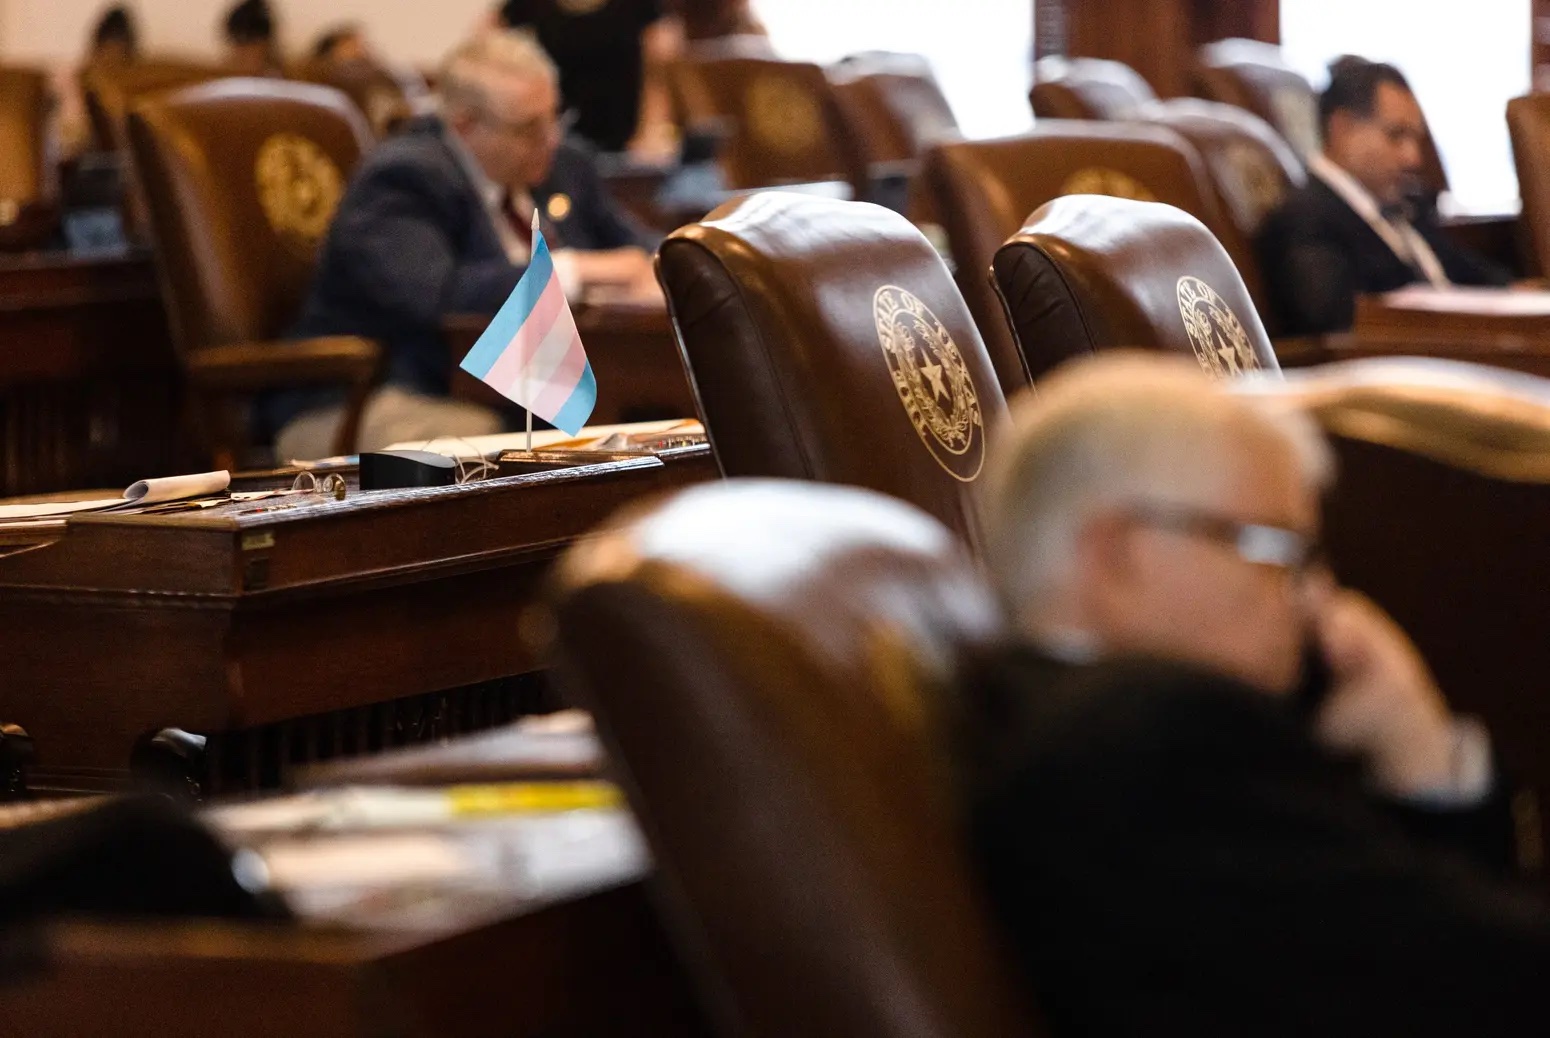 A transgender pride flag sits on the desk of Texas lawmakers.